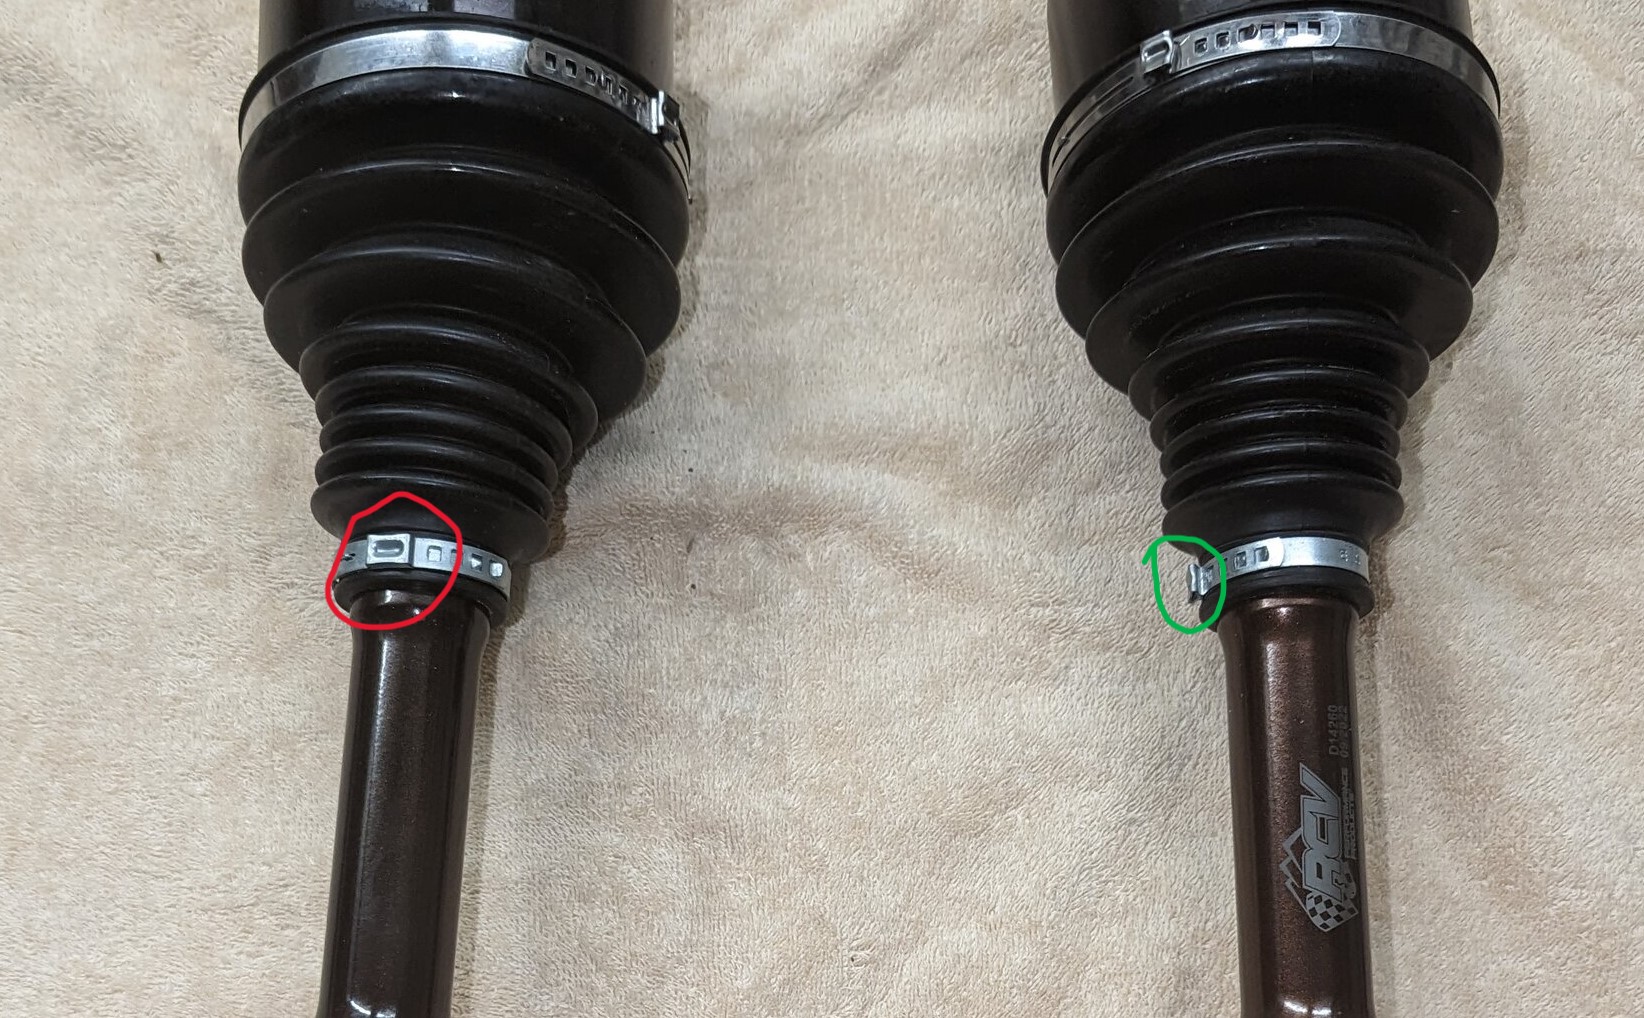 Ford Bronco RCV Performance CV Axles - are they junk or did I get a defective set? PXL_20230404_025612276 (1)